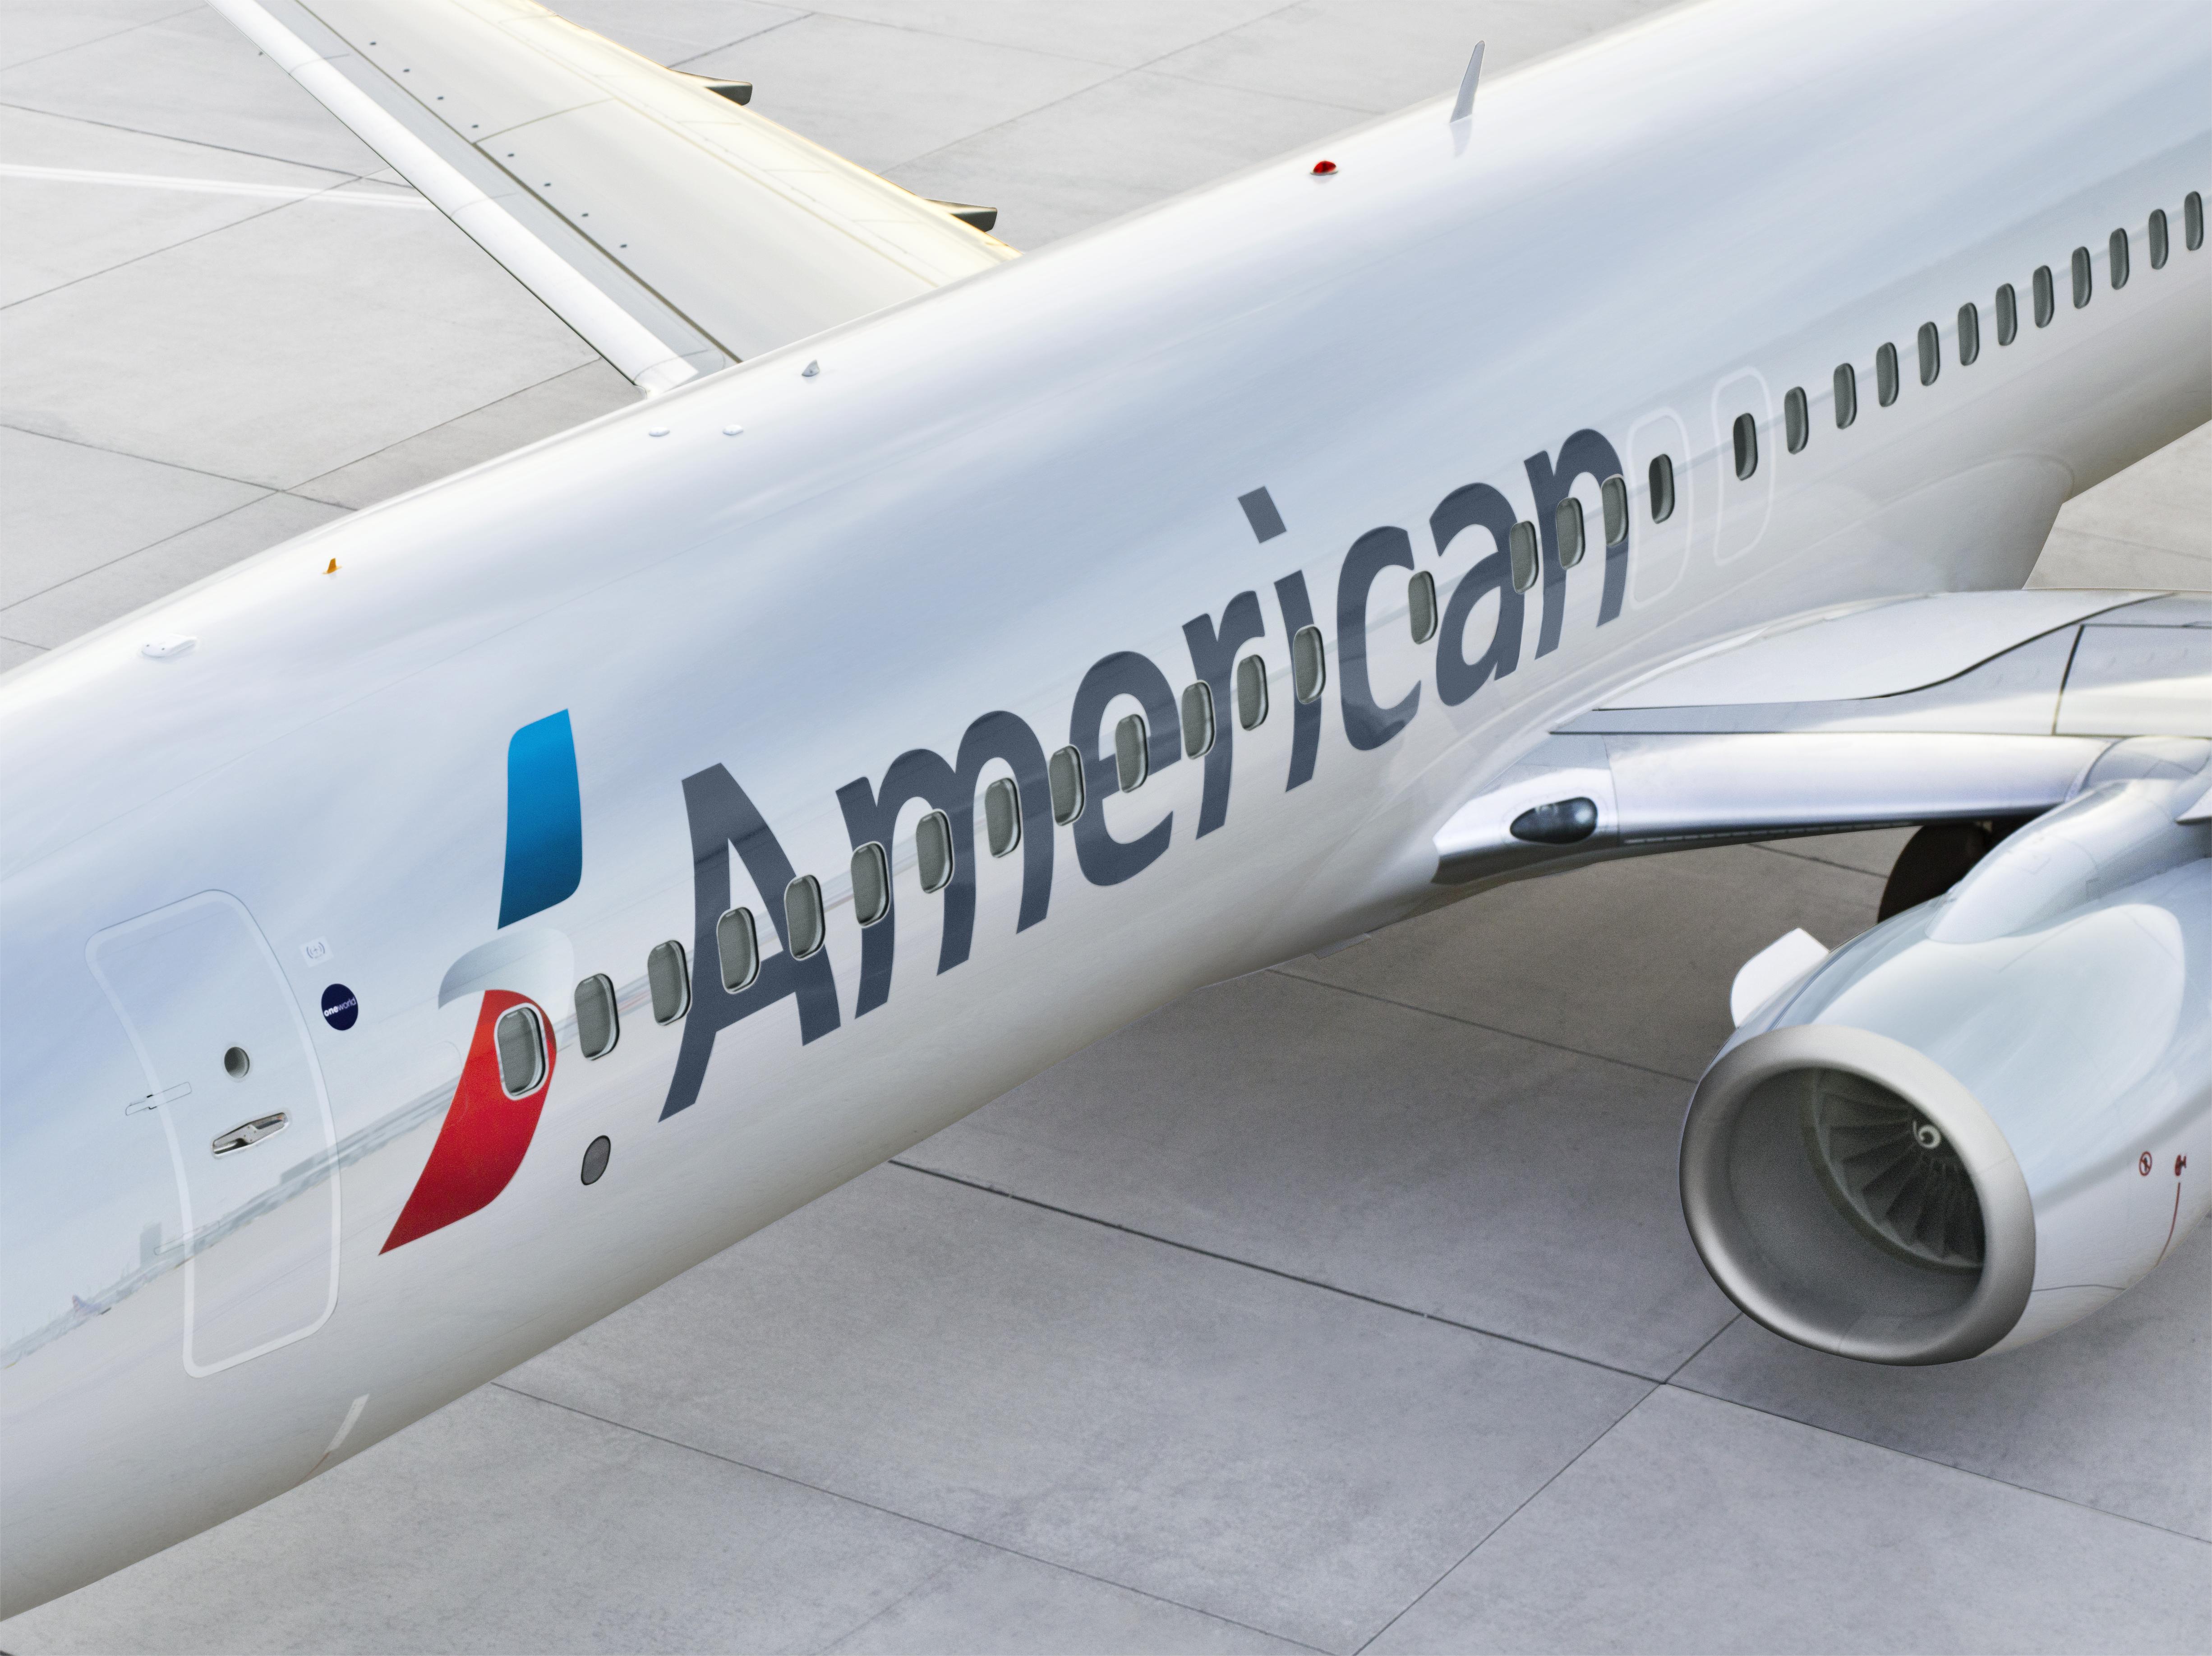 Up to 50,000 Bonus American Airline Miles with Flights to Europe!